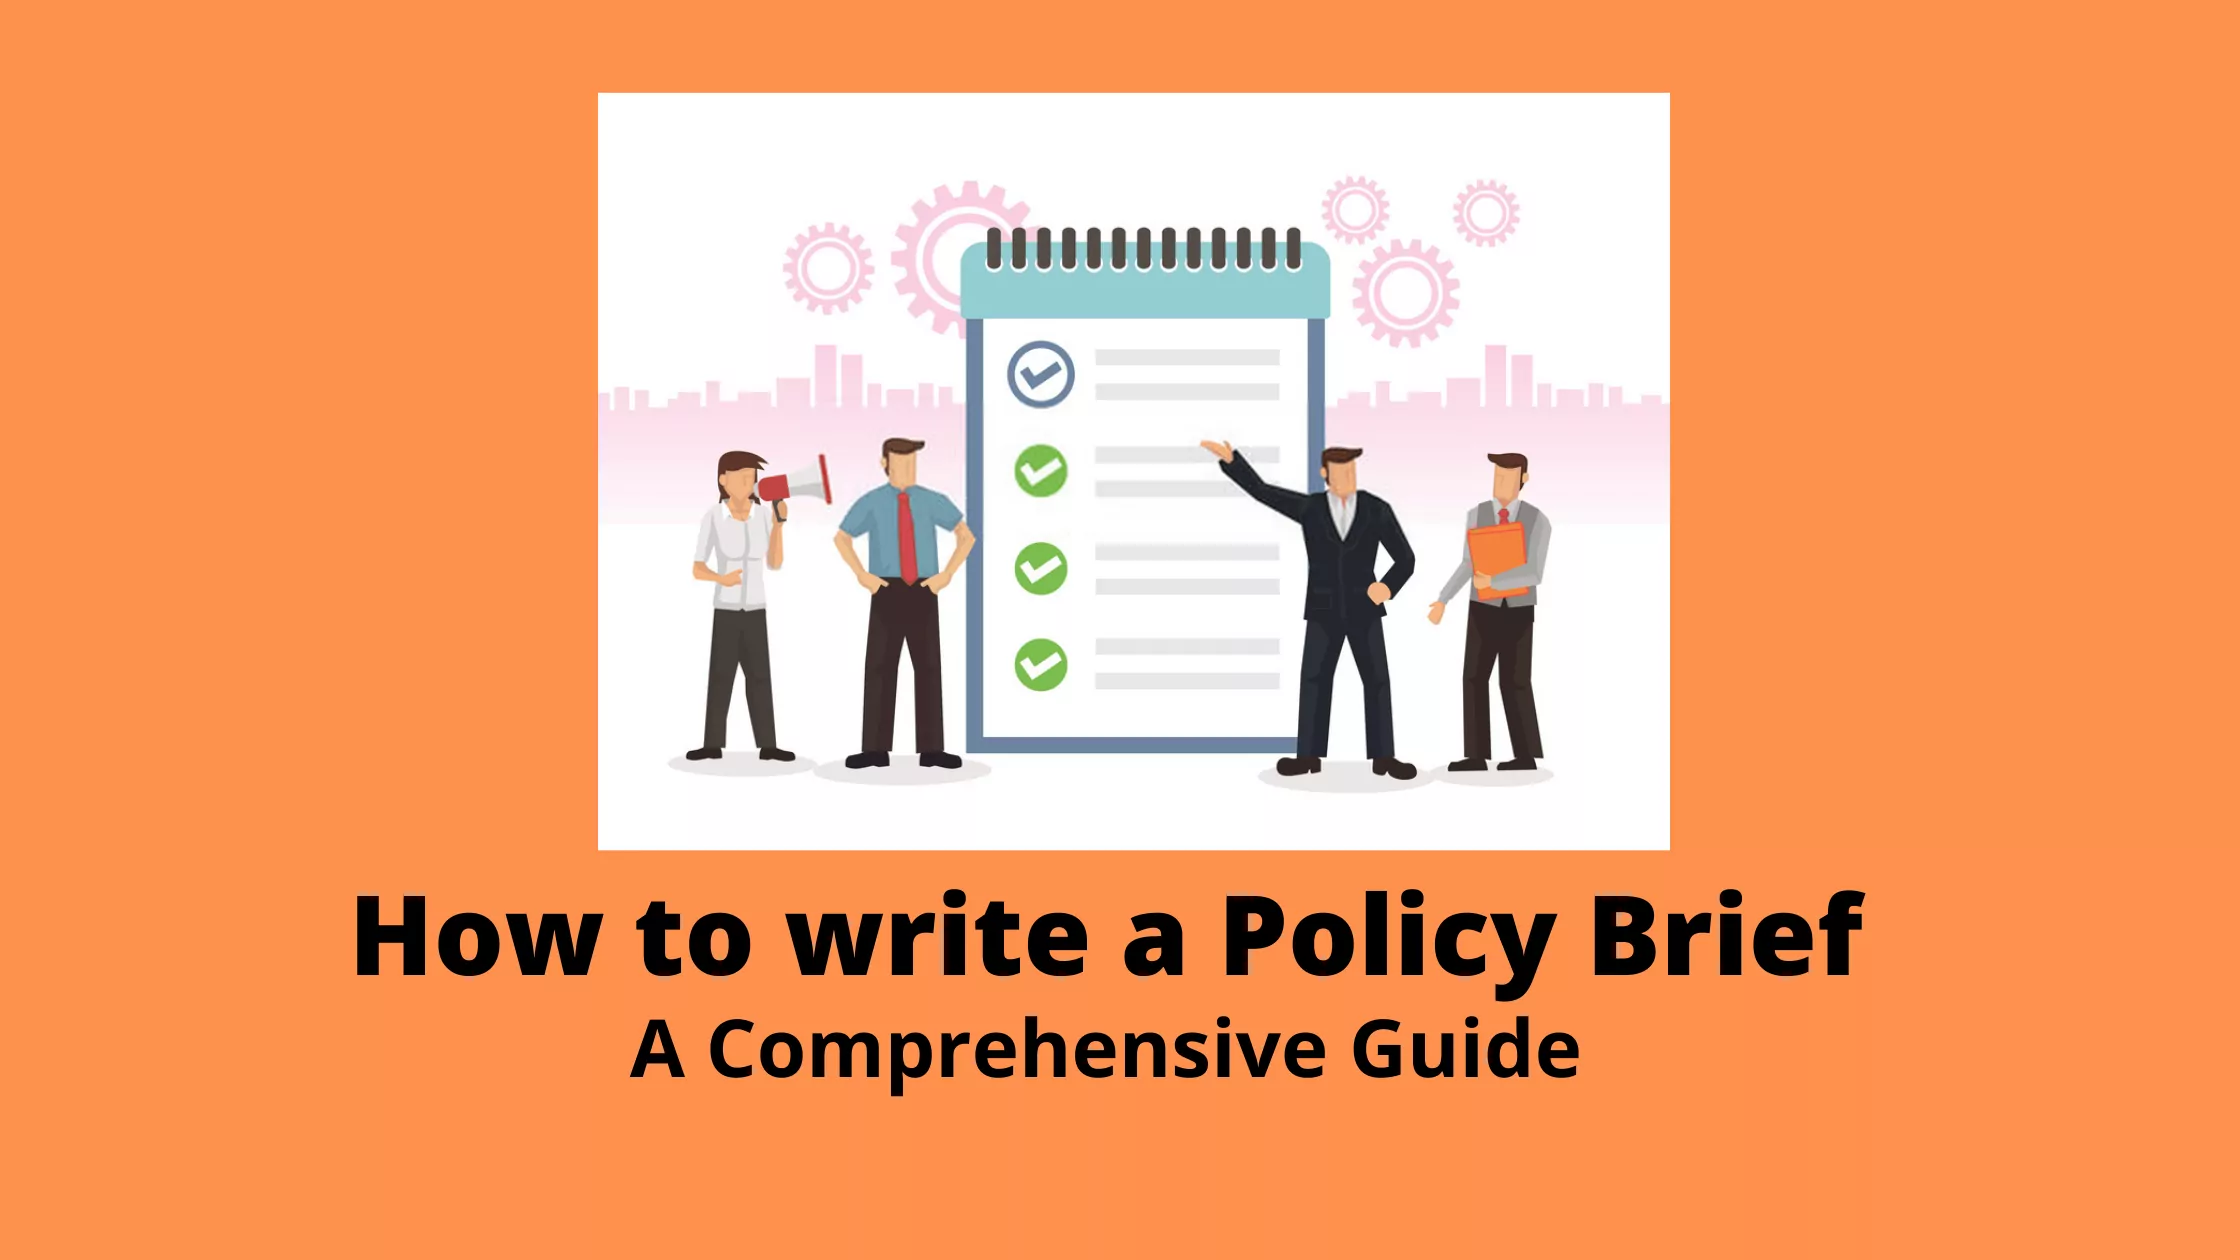 how to write a policy brief - A guide